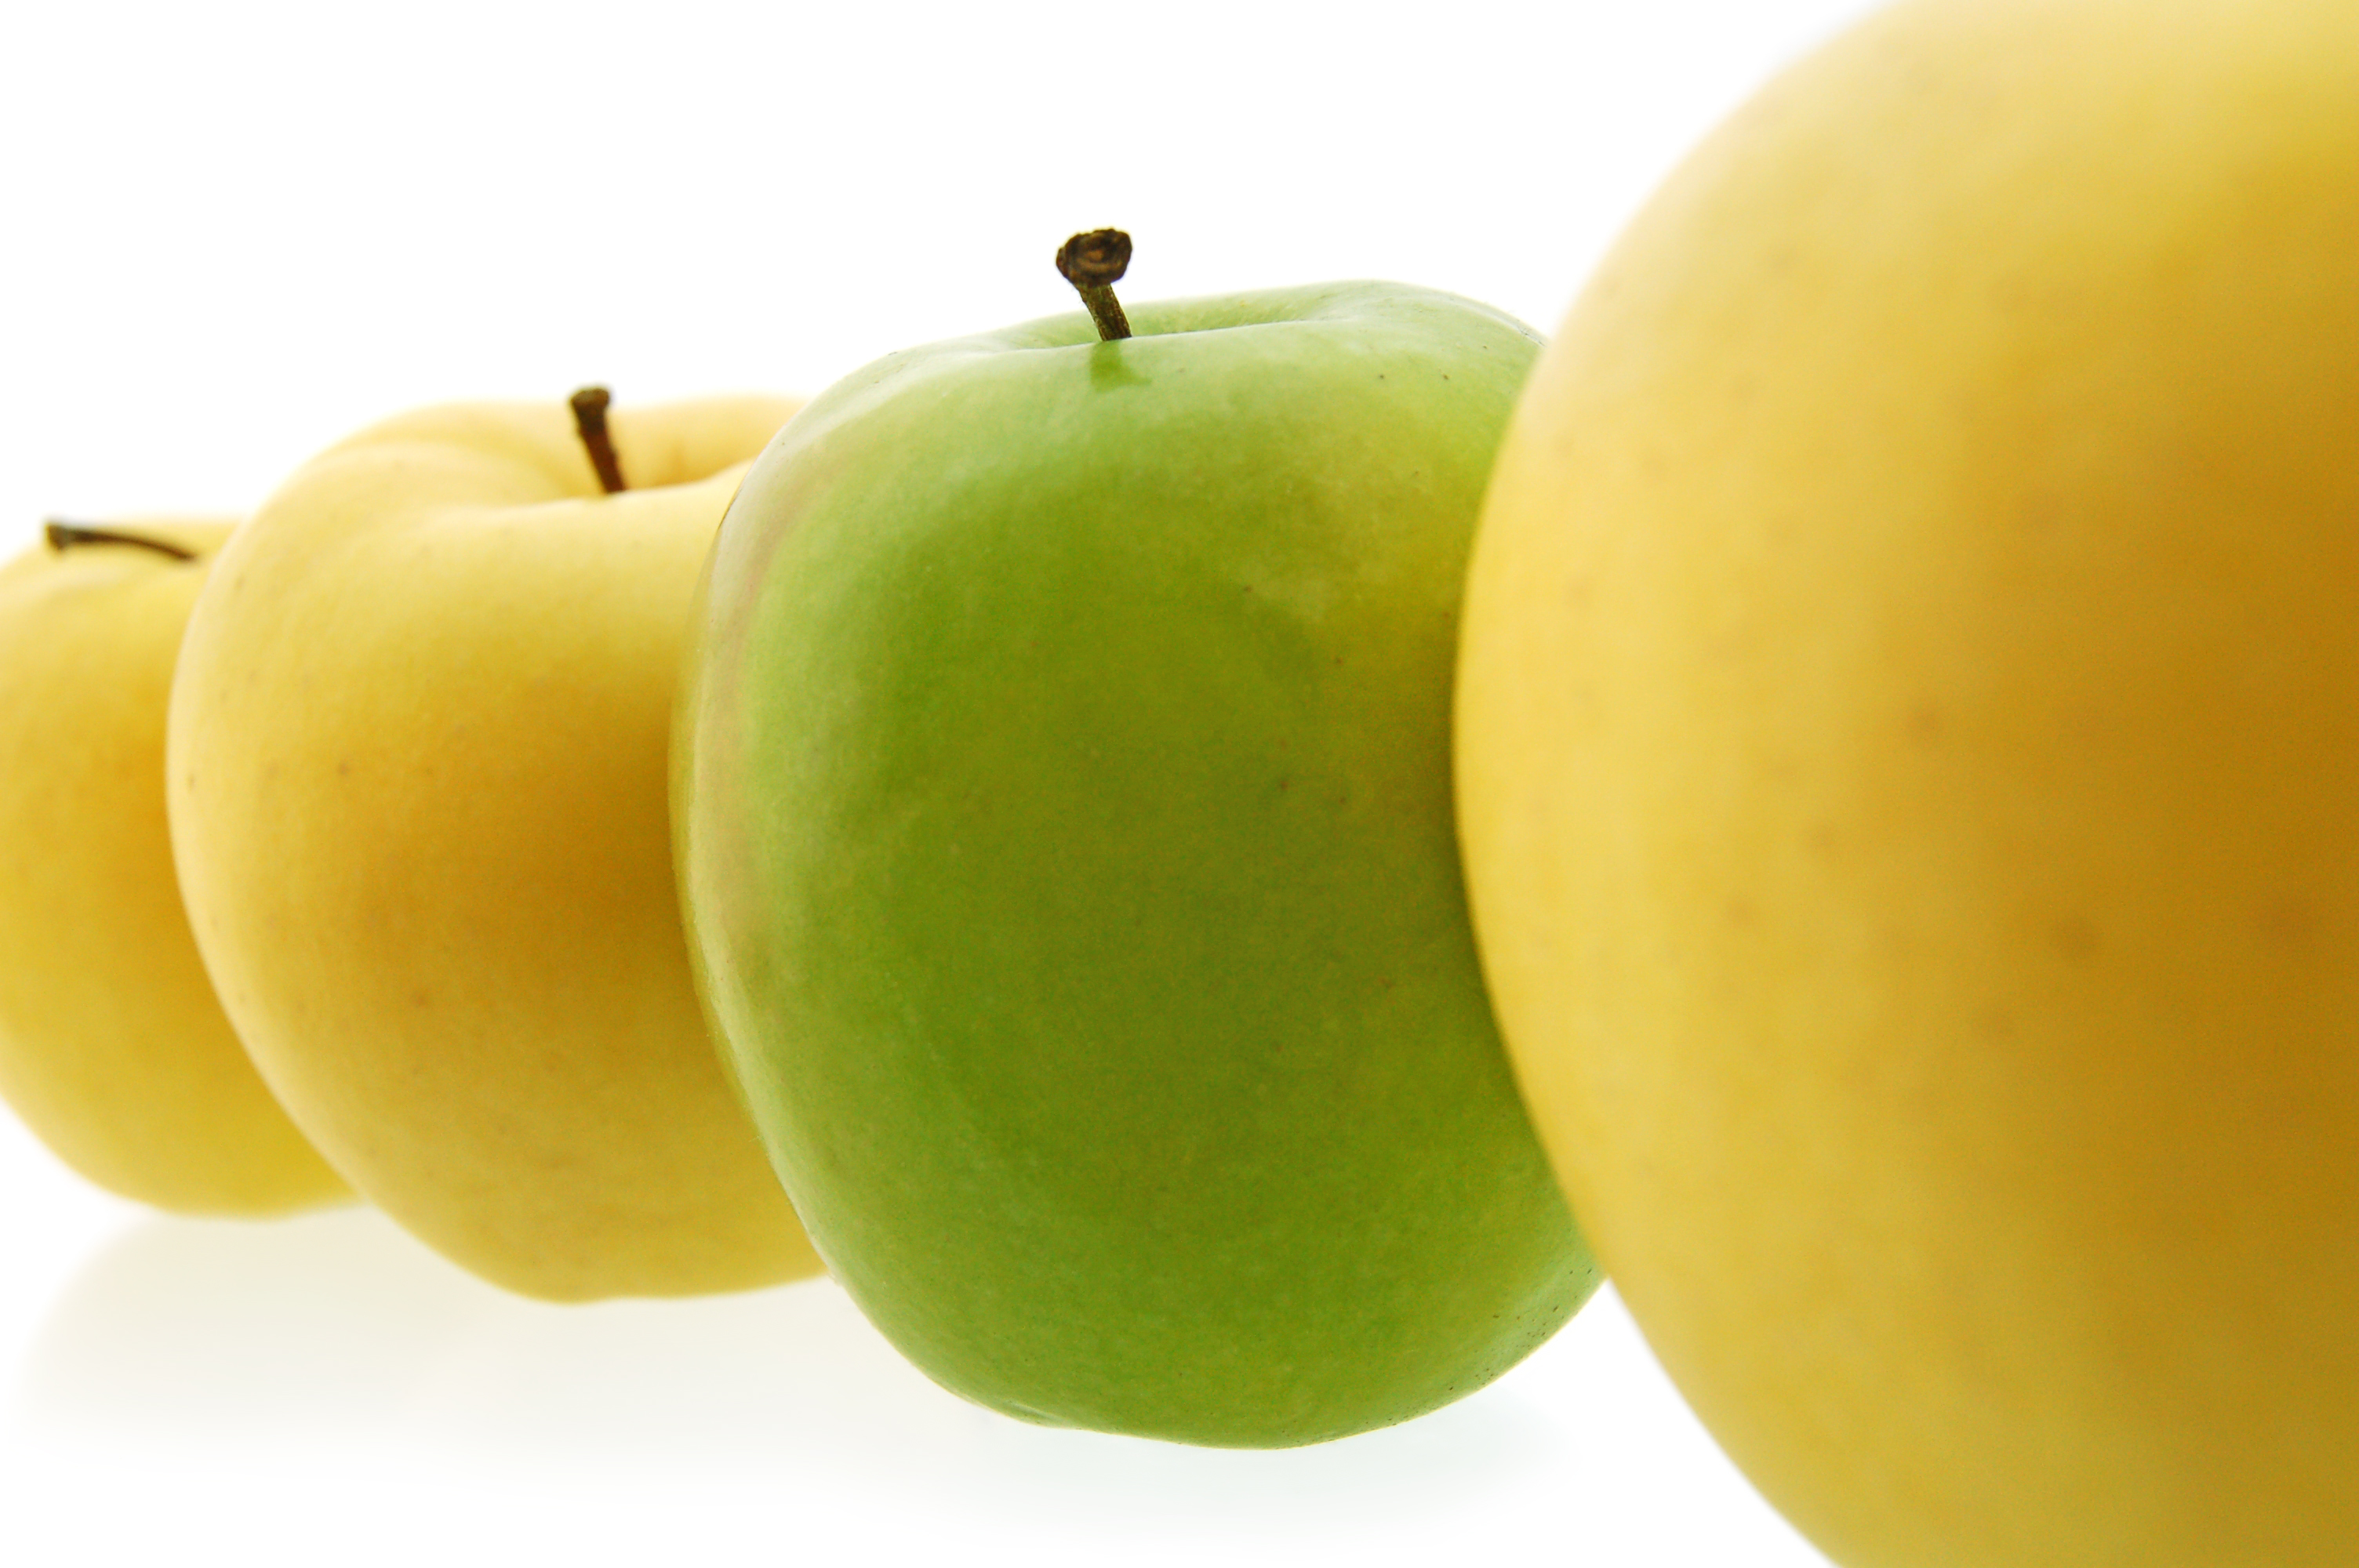 Yellow and green apples photo